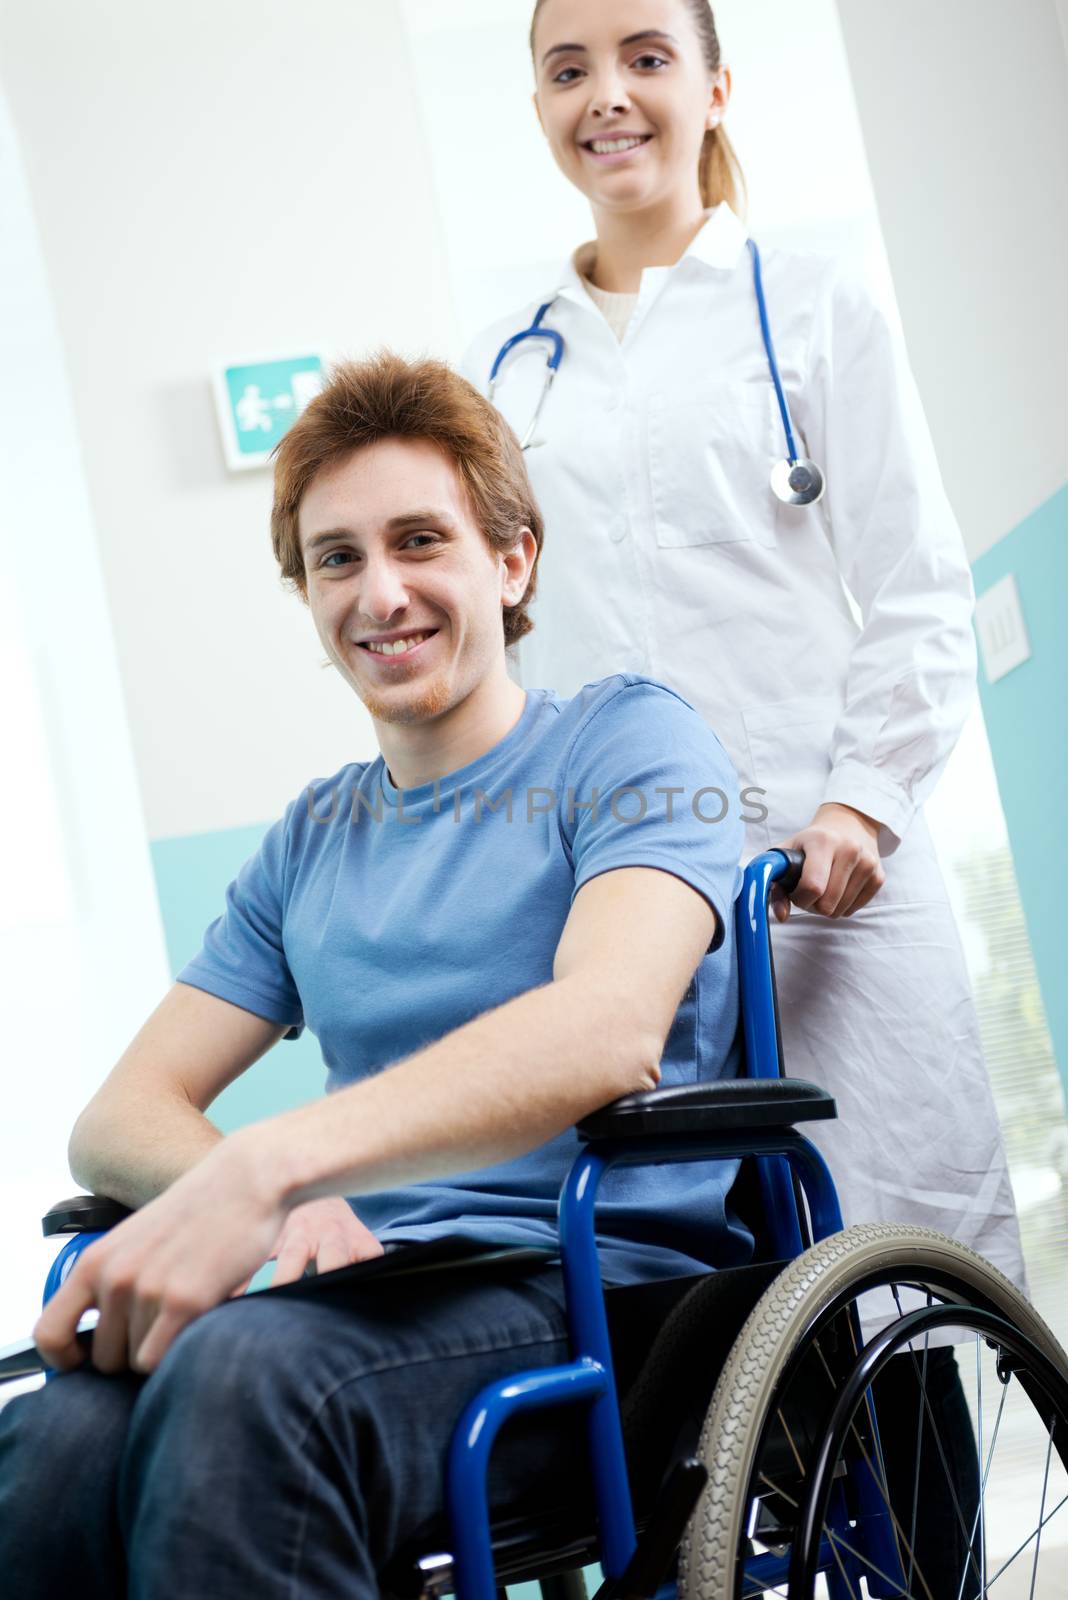 Female nurse pushing her patient on a wheelchair